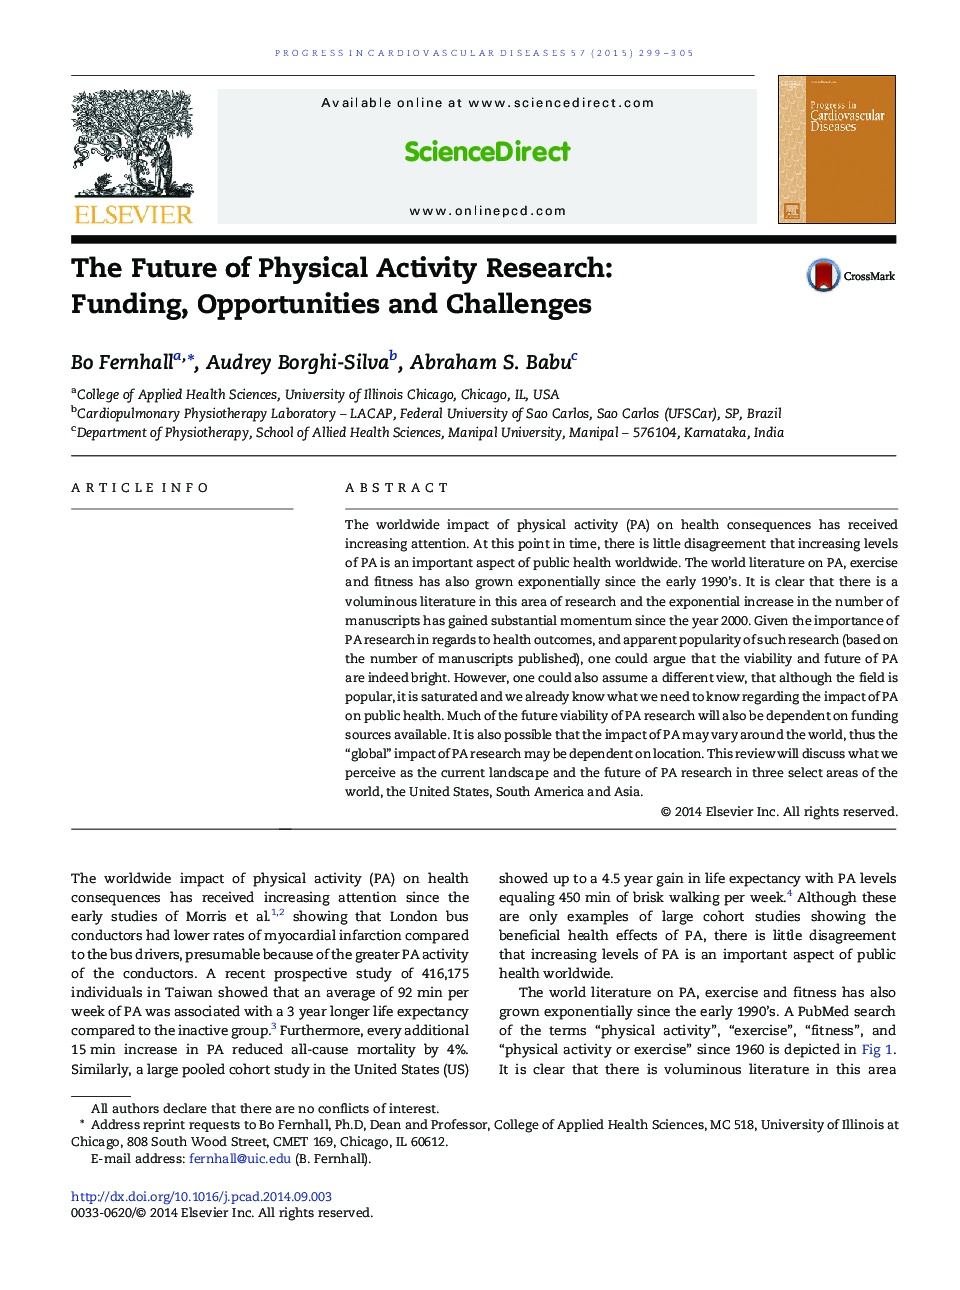 The Future of Physical Activity Research: Funding, Opportunities and Challenges 